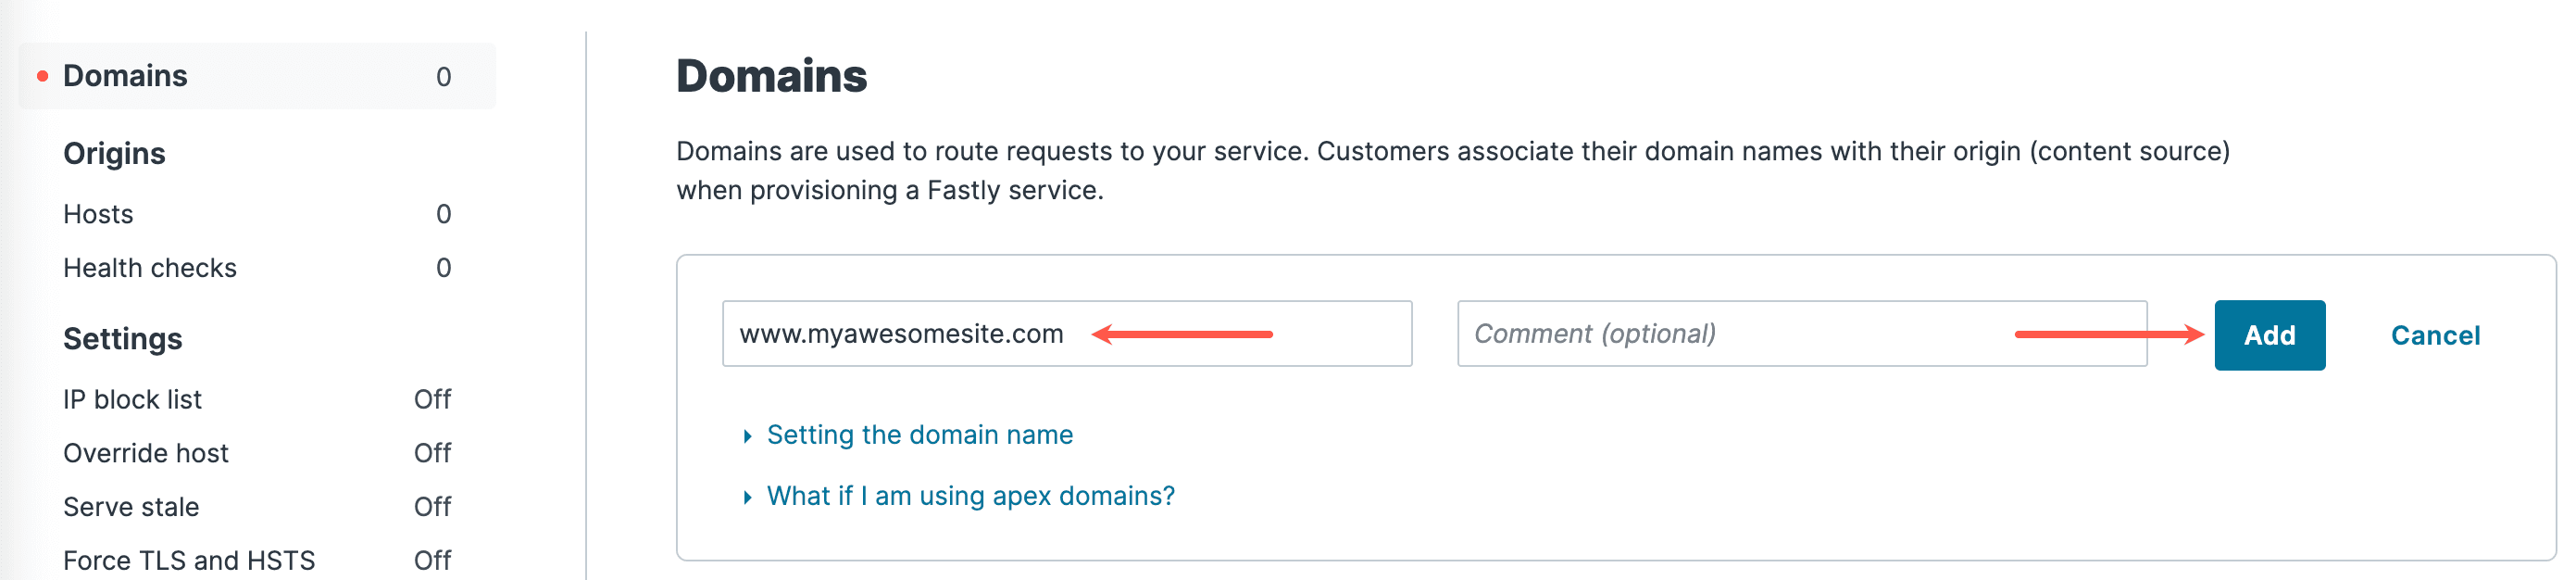 Adding your domain at Fastly.